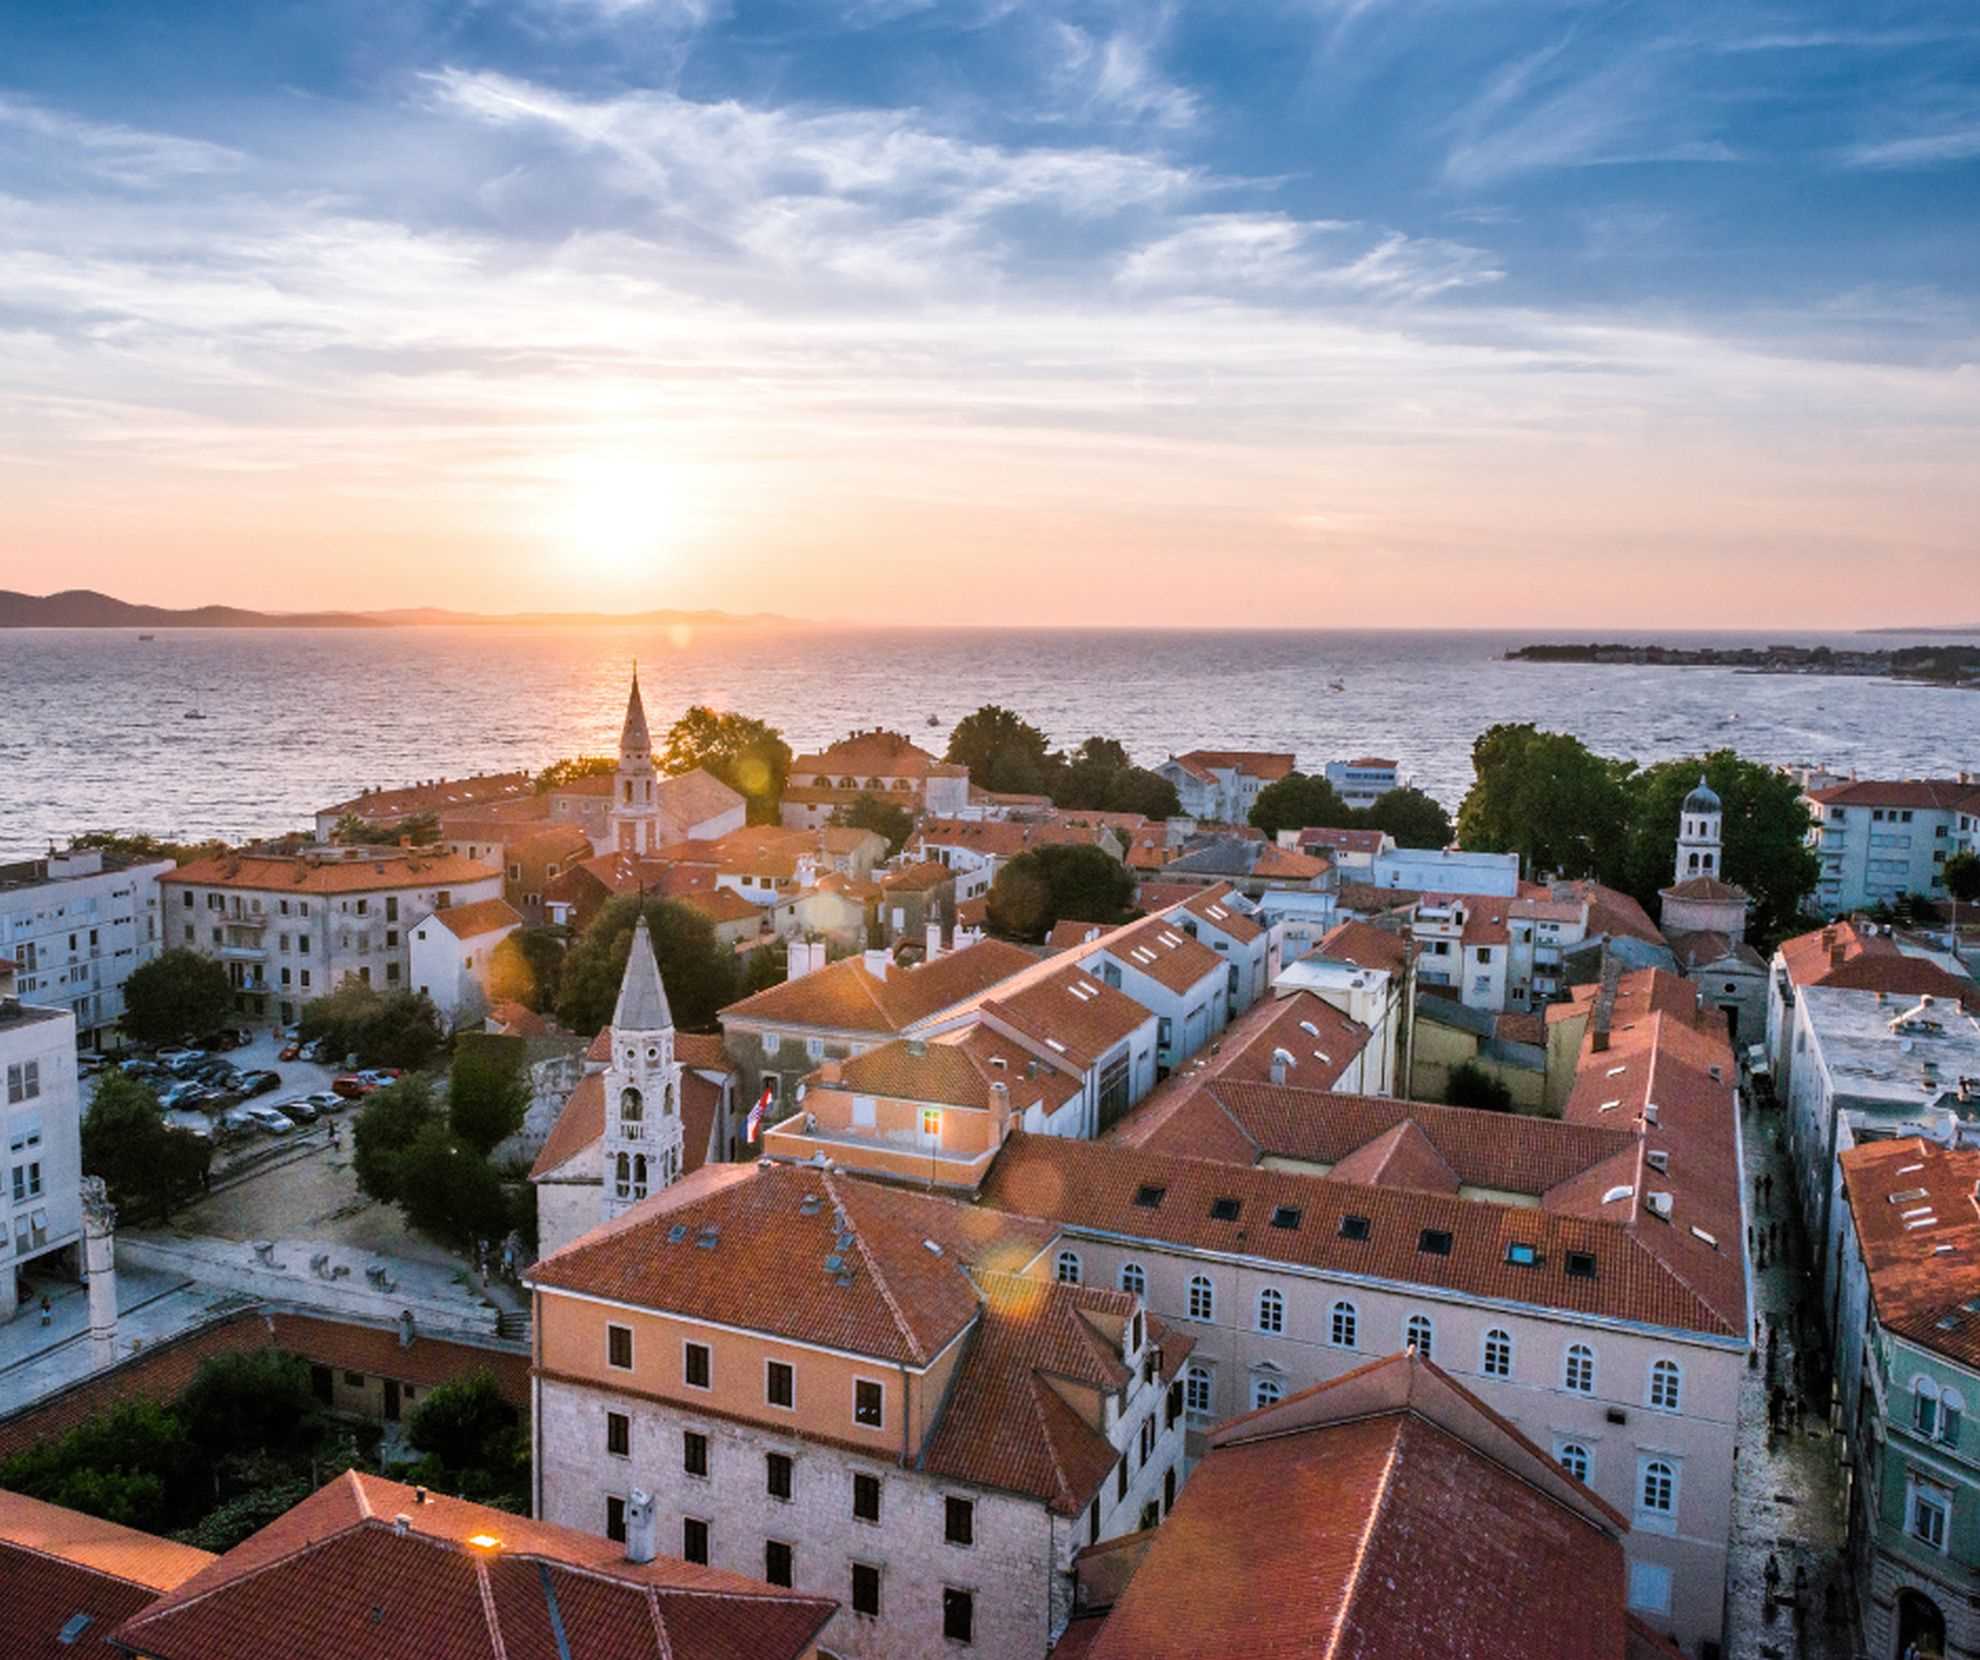 Why is Zadar so special?